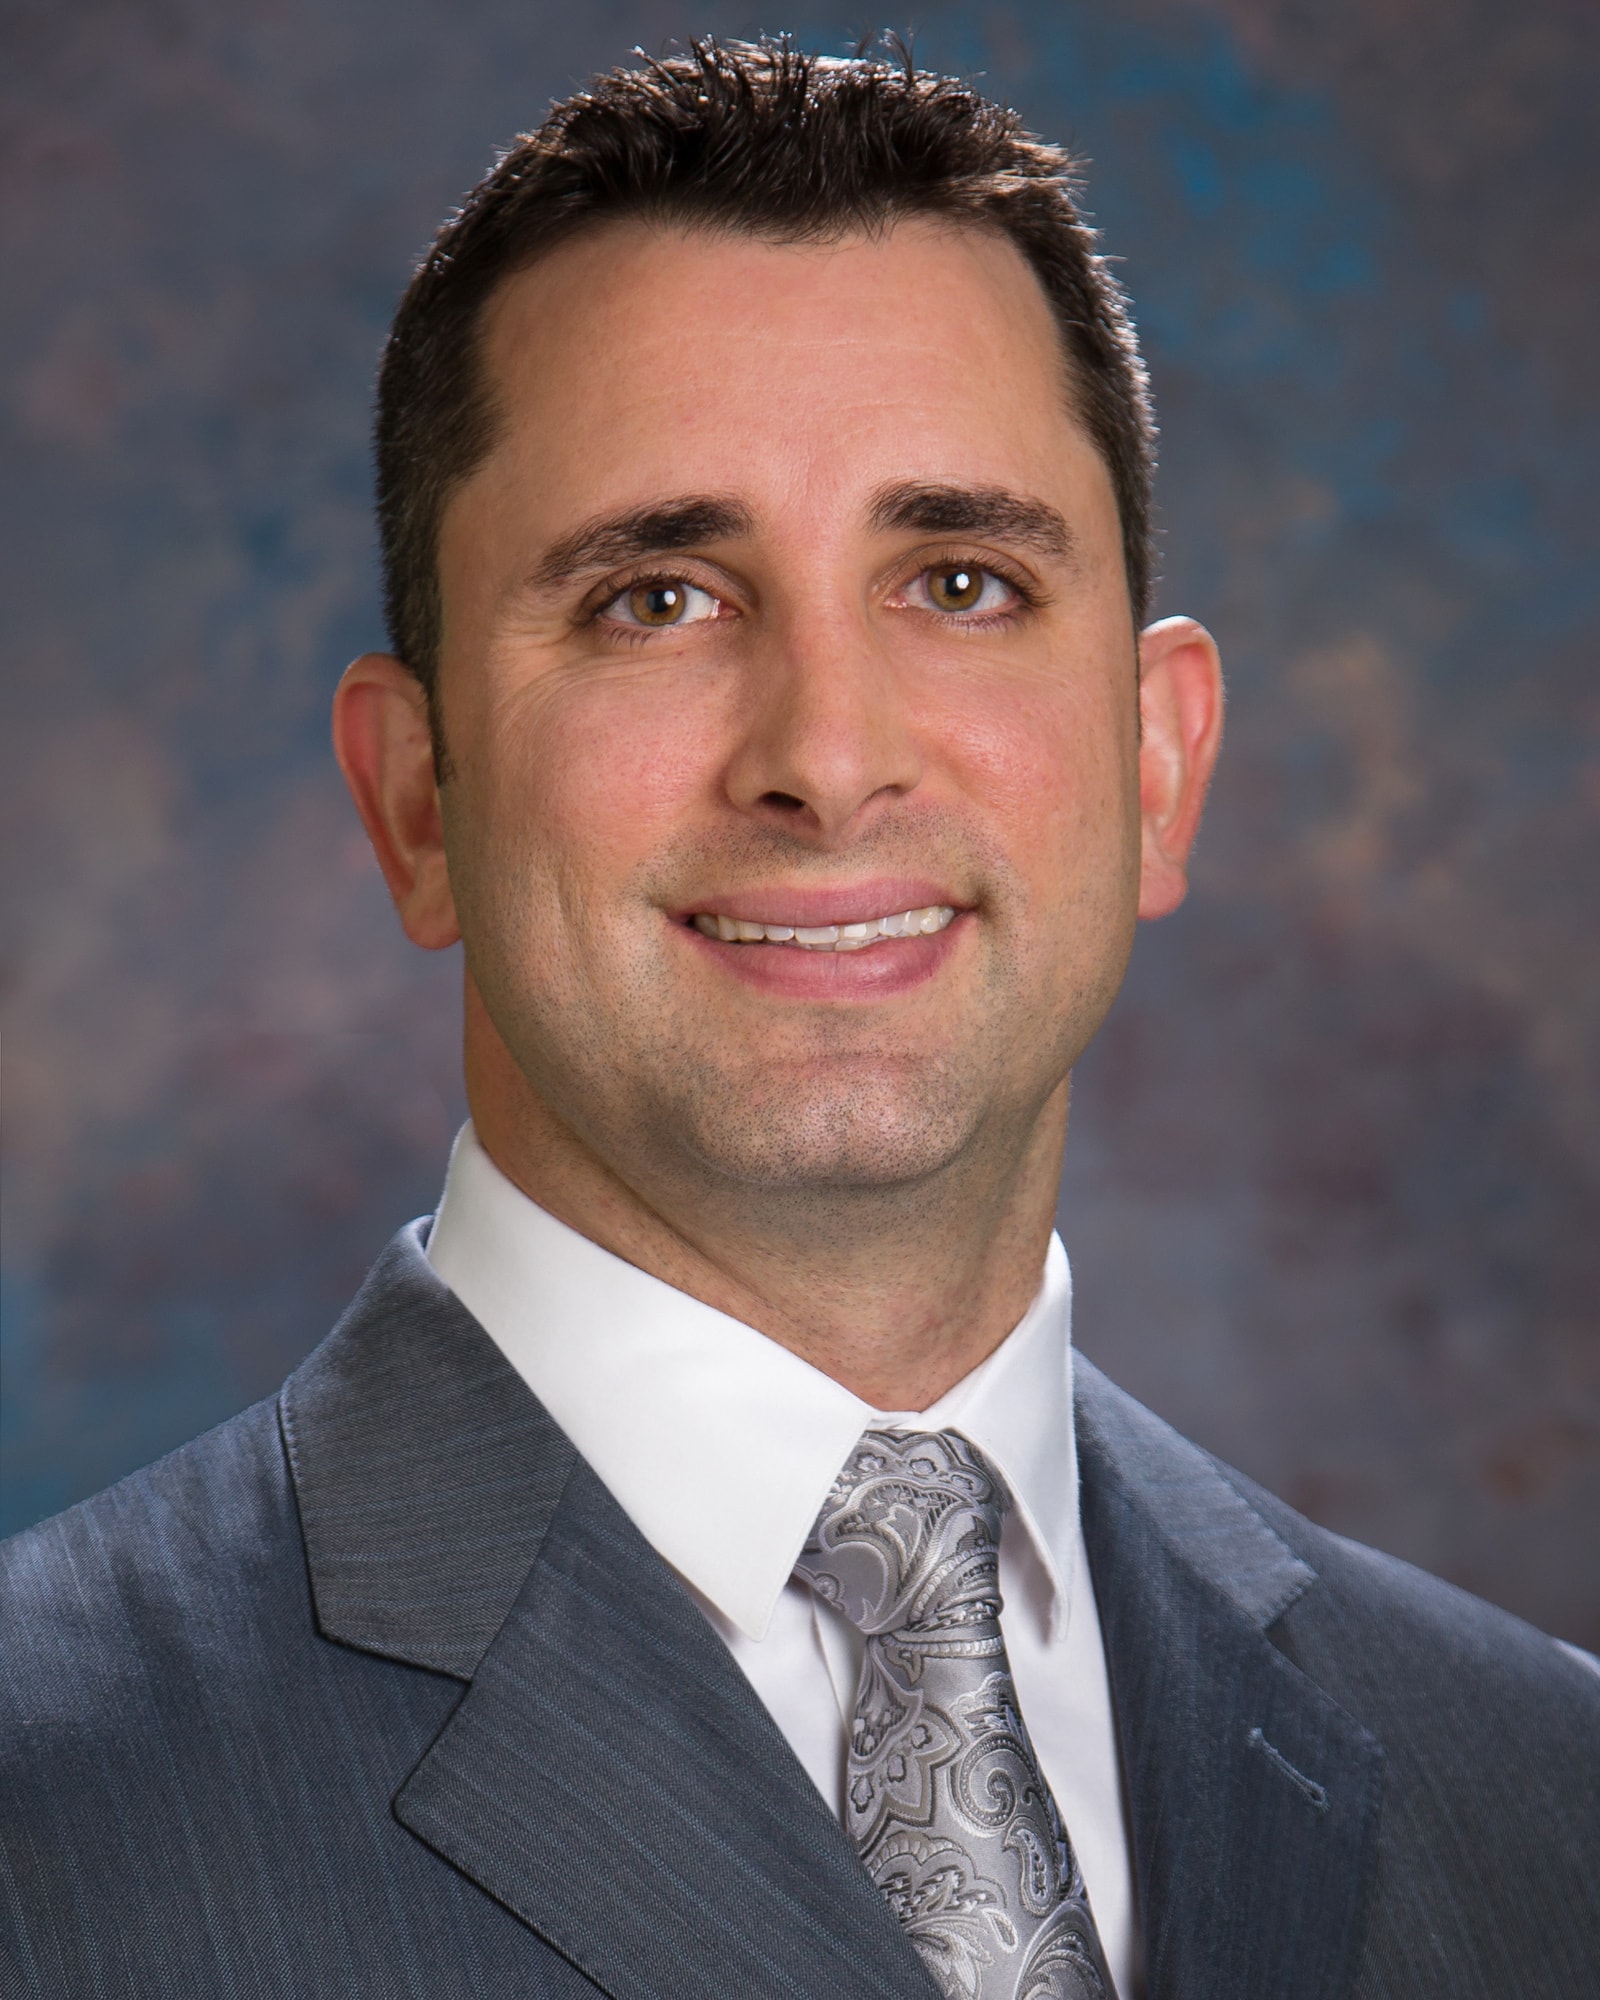 Photograph of Dr. Jay Turner, PhD, a Phoenix-based neurosurgeon specialized in complex spinal surgery and spinal tumor treatment.